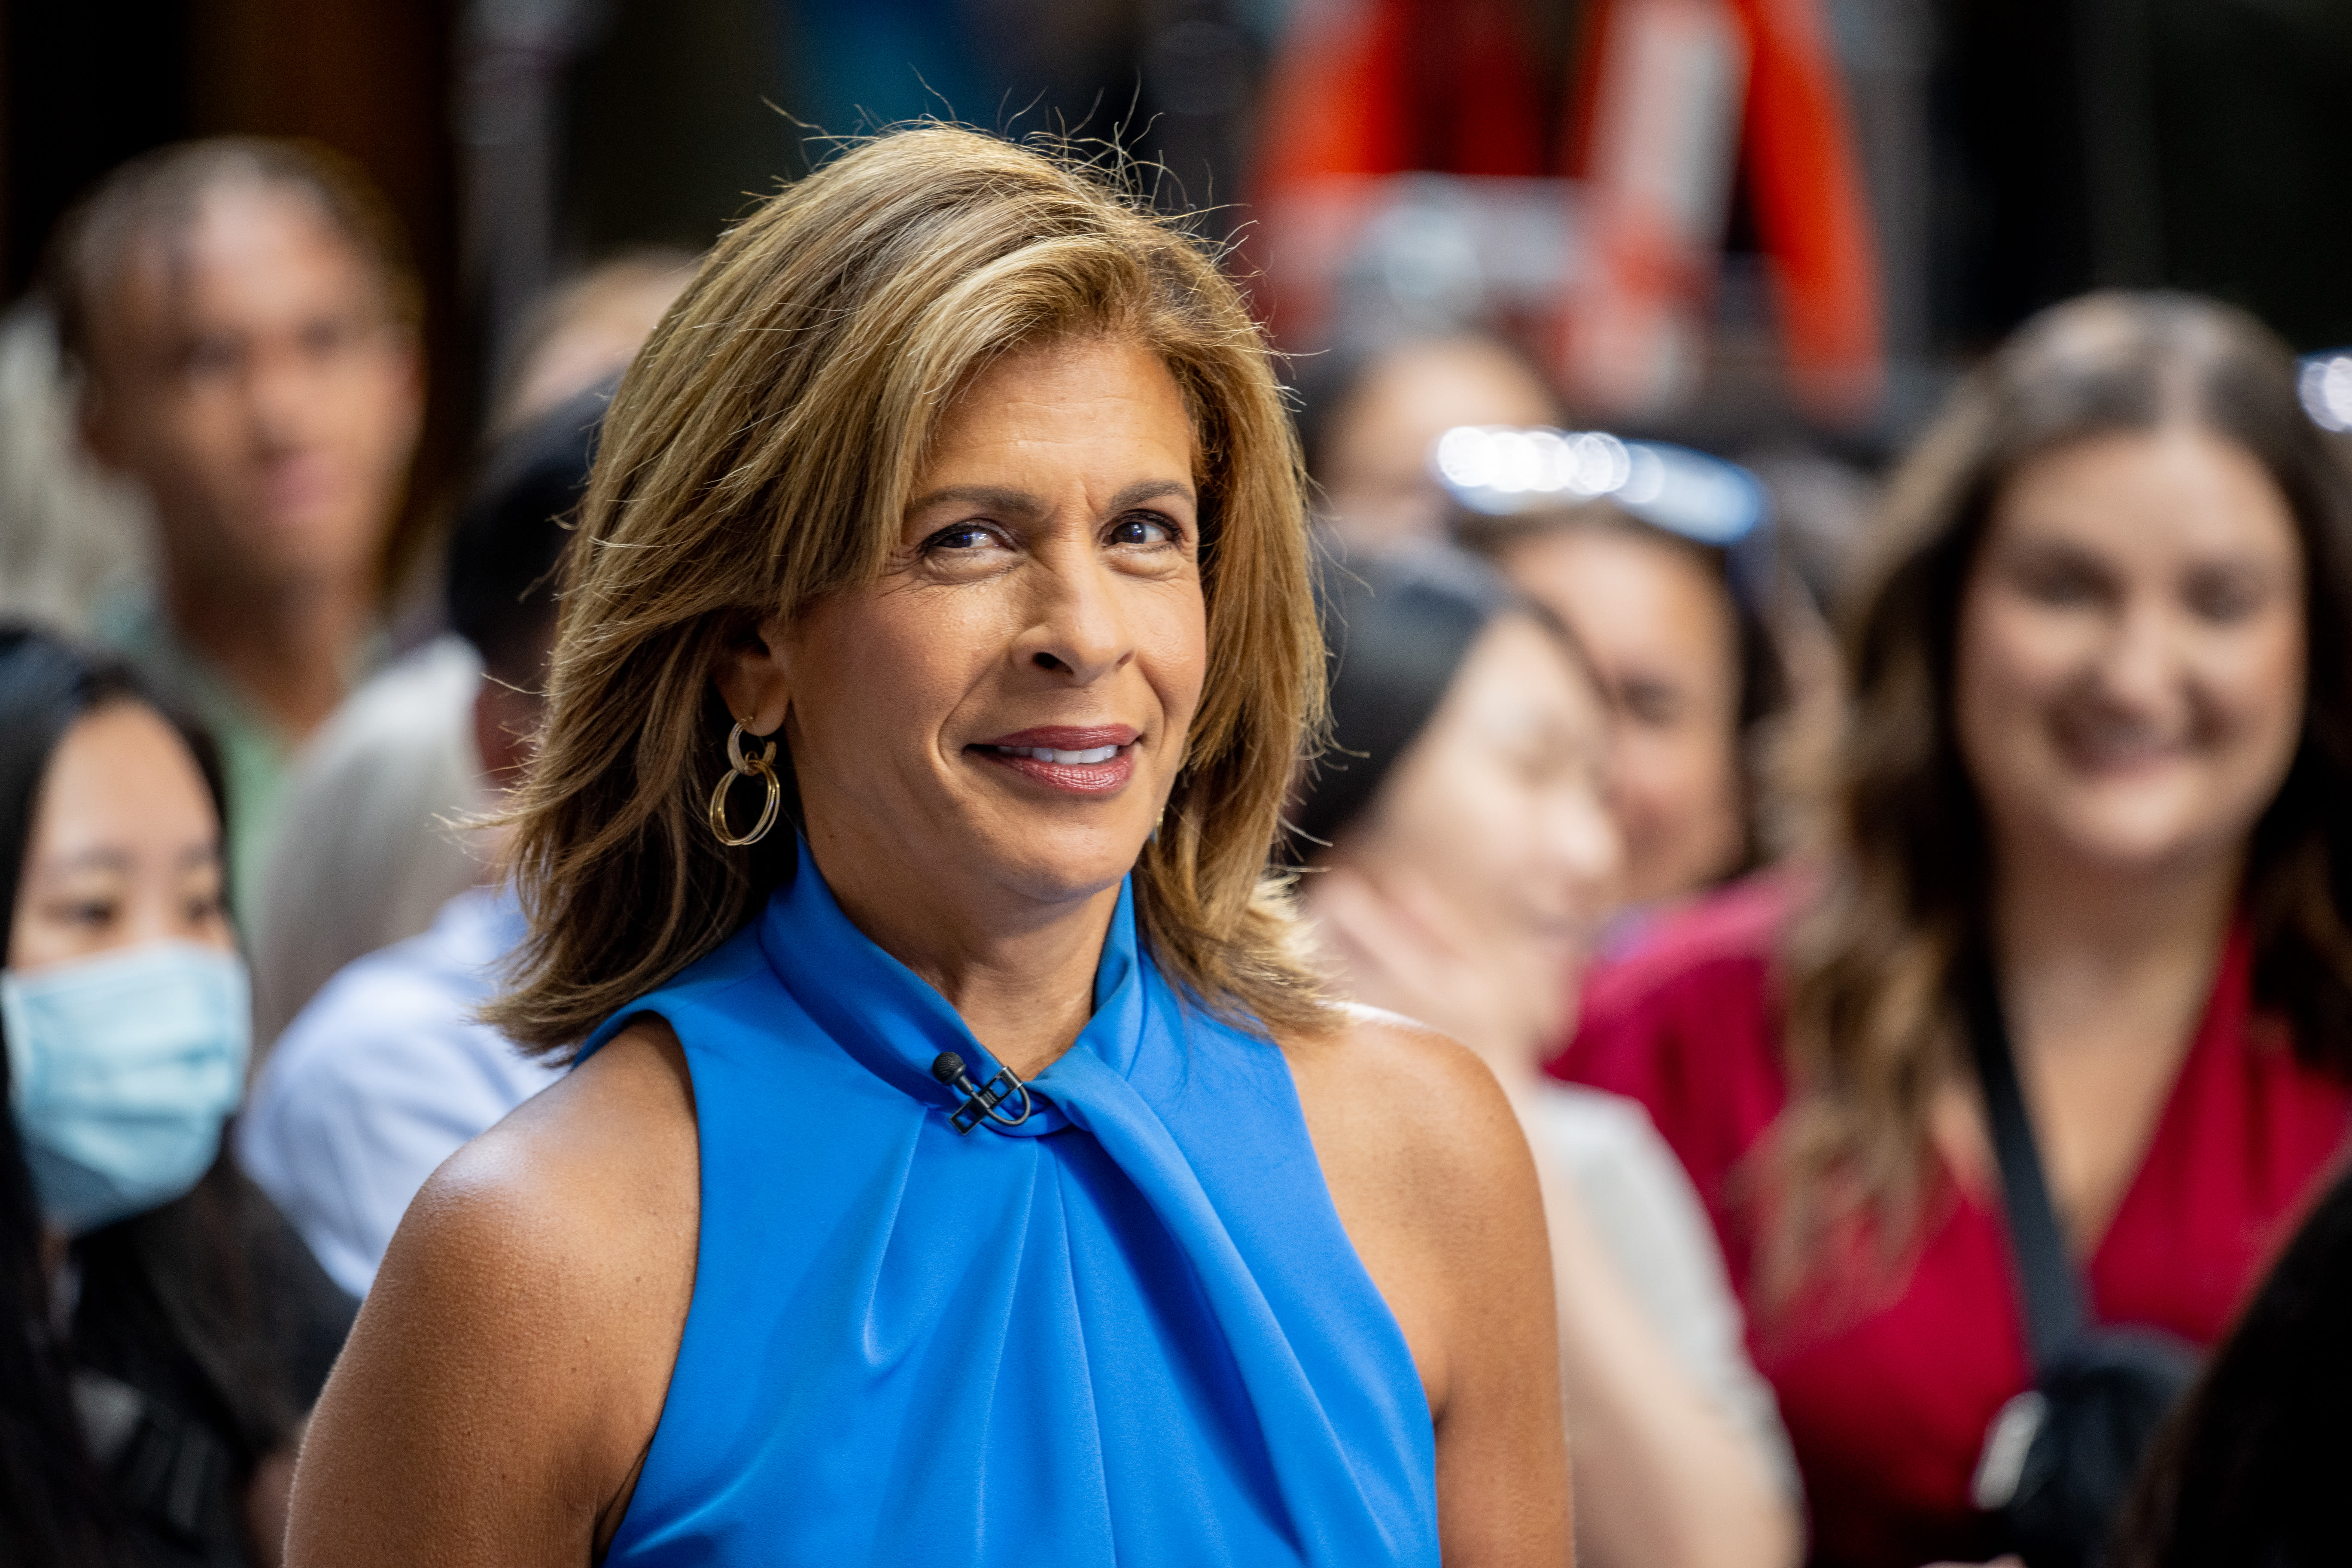 Hoda Kotb Posts Inspiring Quote About ‘Refueling Her Soul’ Amid Move Into a New Home With Kids